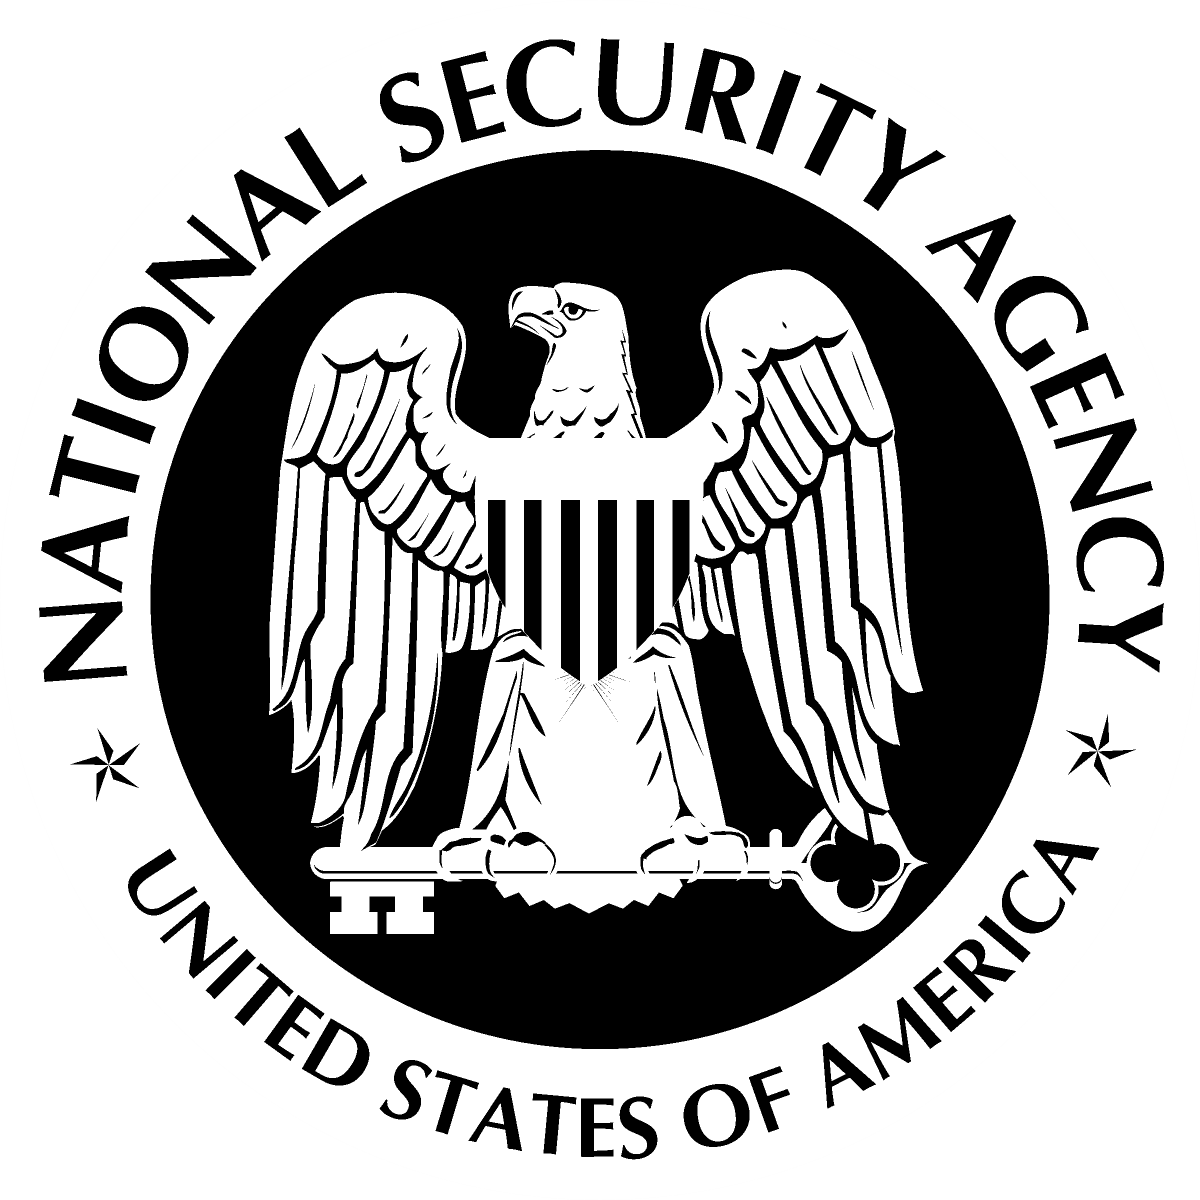 nsa-national-security-agency-logo-black-and-white_r